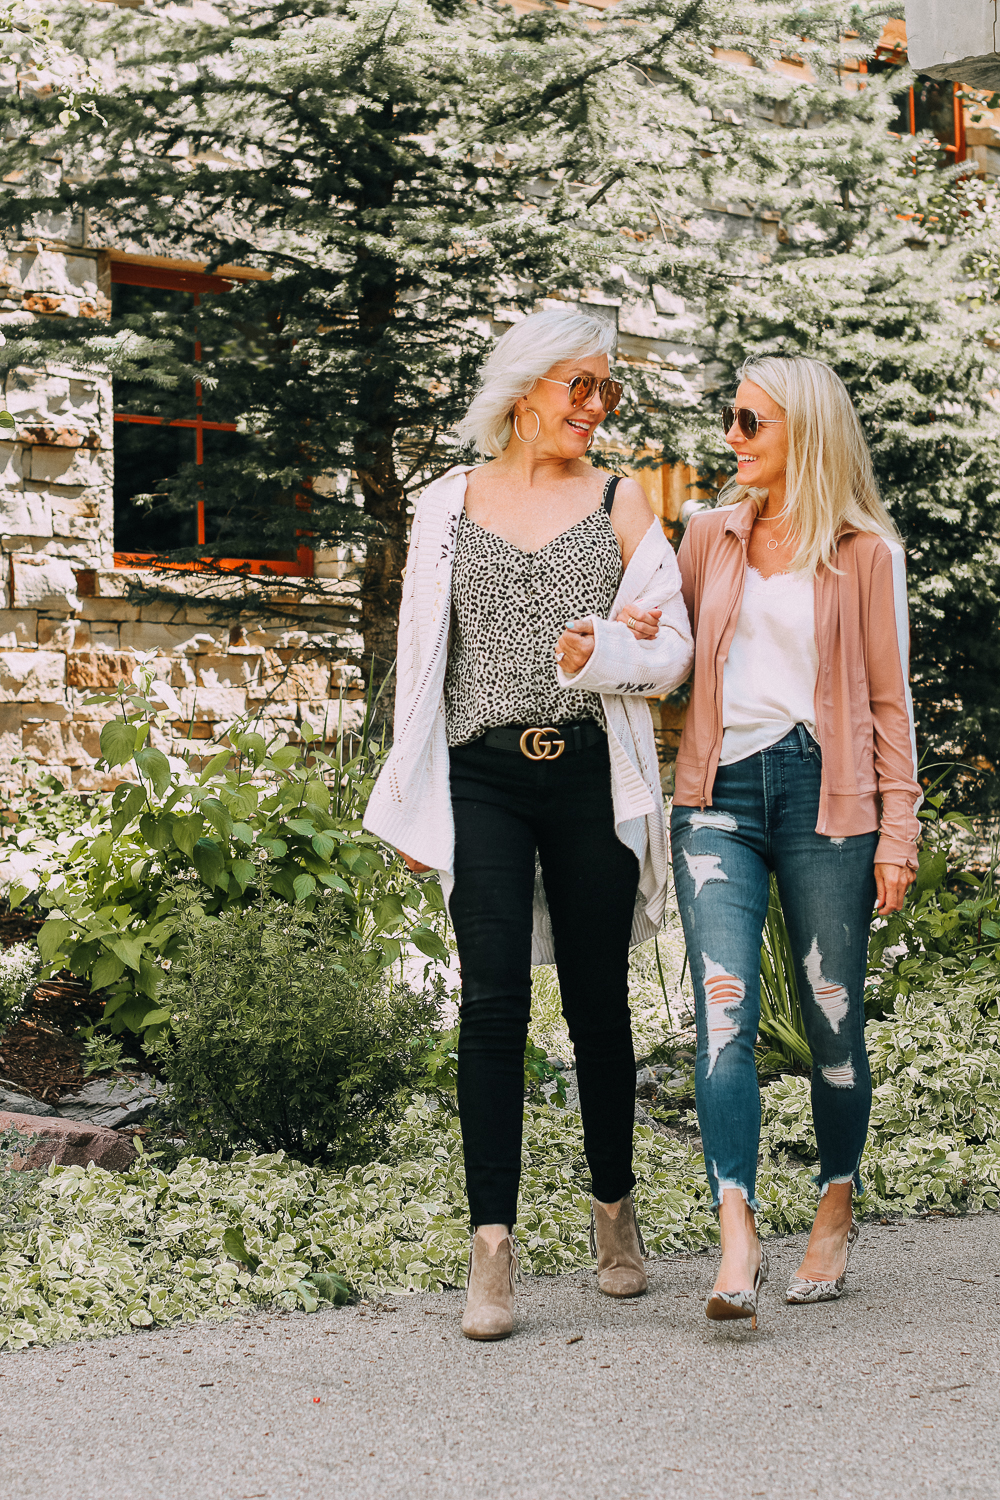 Transitional Dressing from summer into fall wardrobe with She She Show and Busbee Style, fashion bloggers over 40